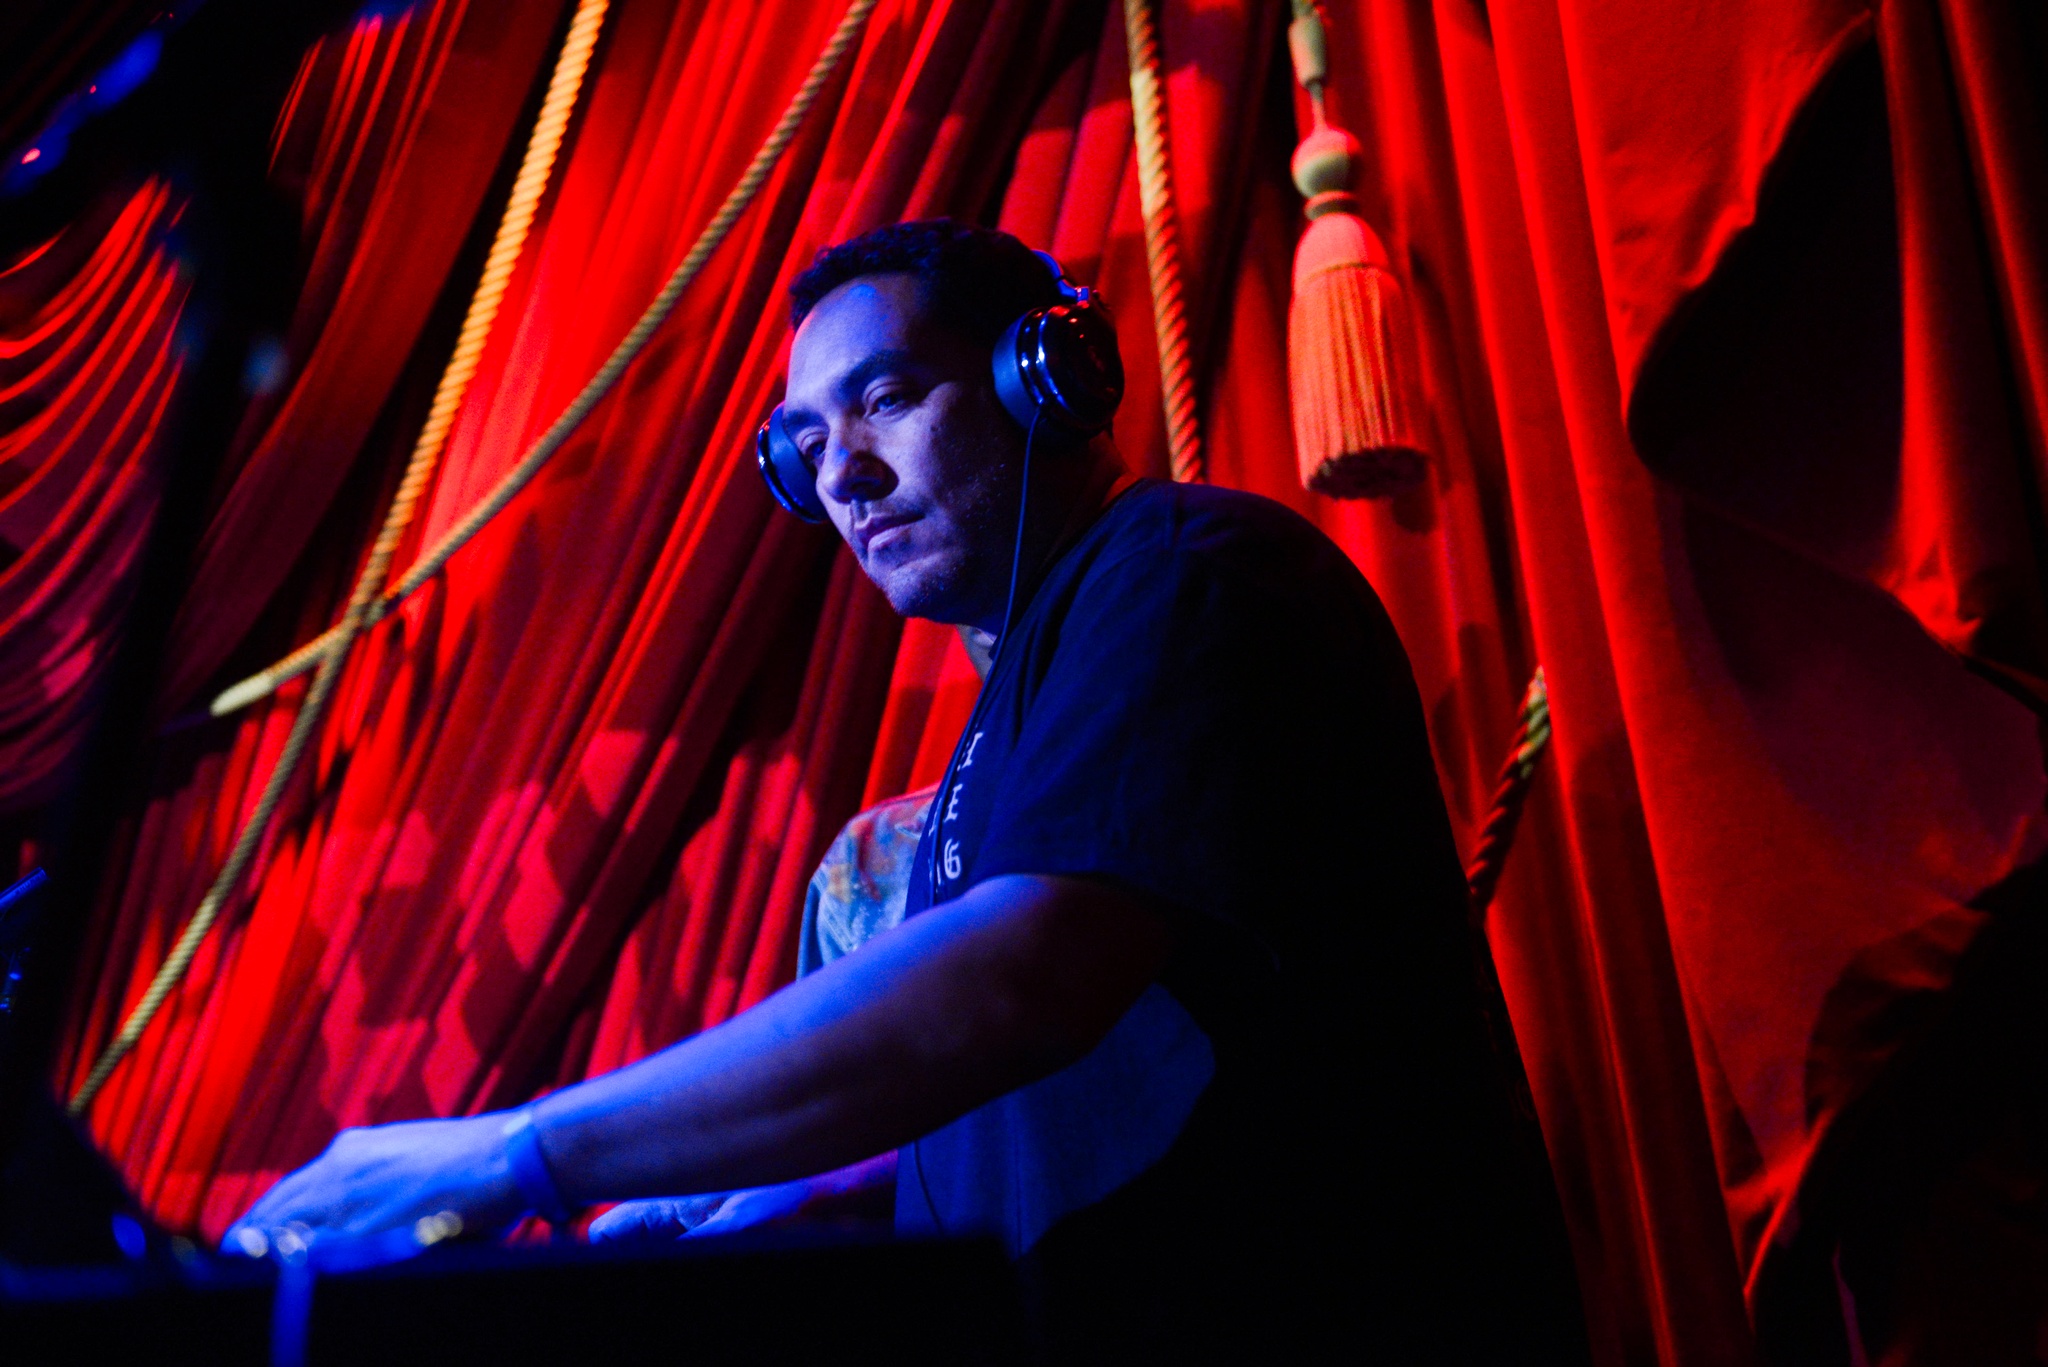 A DJ spinning bathed in blue light on his face and arms with a red curtain hanging behind him. He is seen from a low angle.